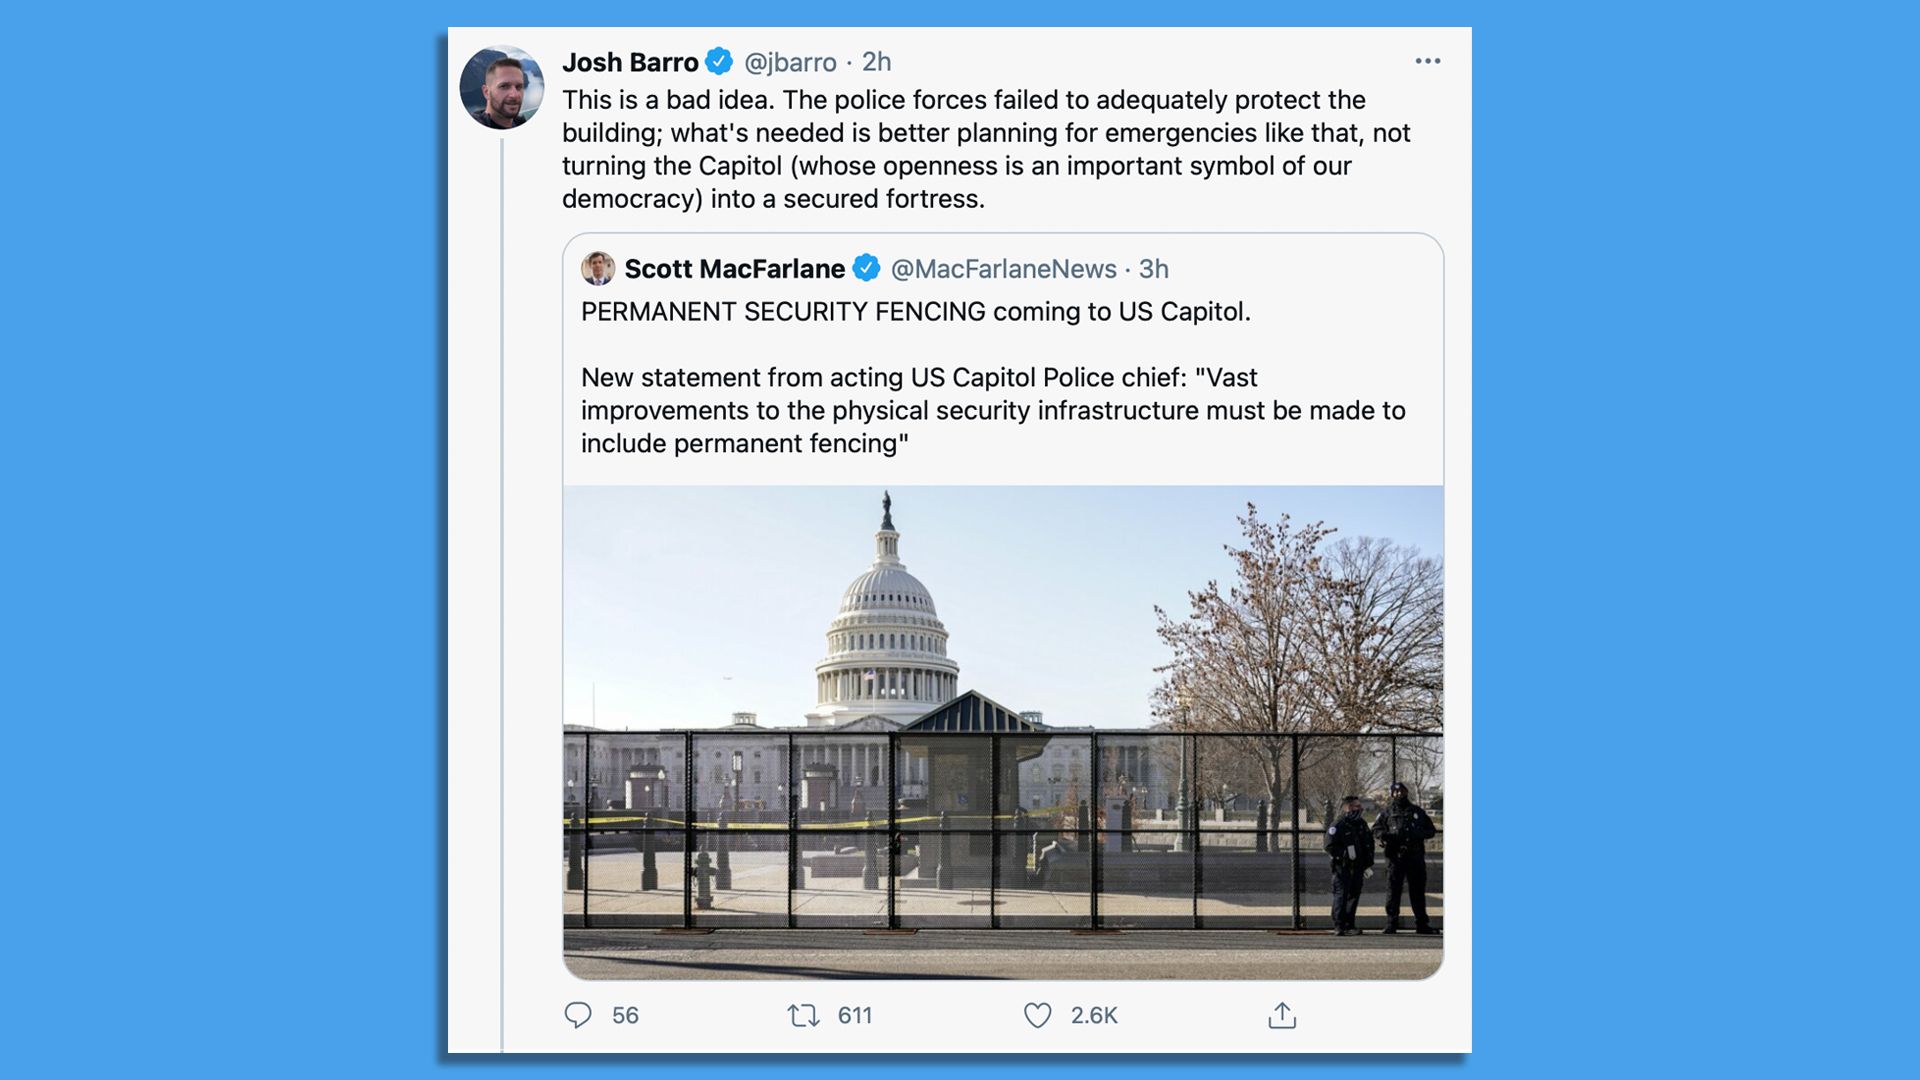 A screenshot shows a Twitter debate about placing permanent fencing around the U.S. Capitol.